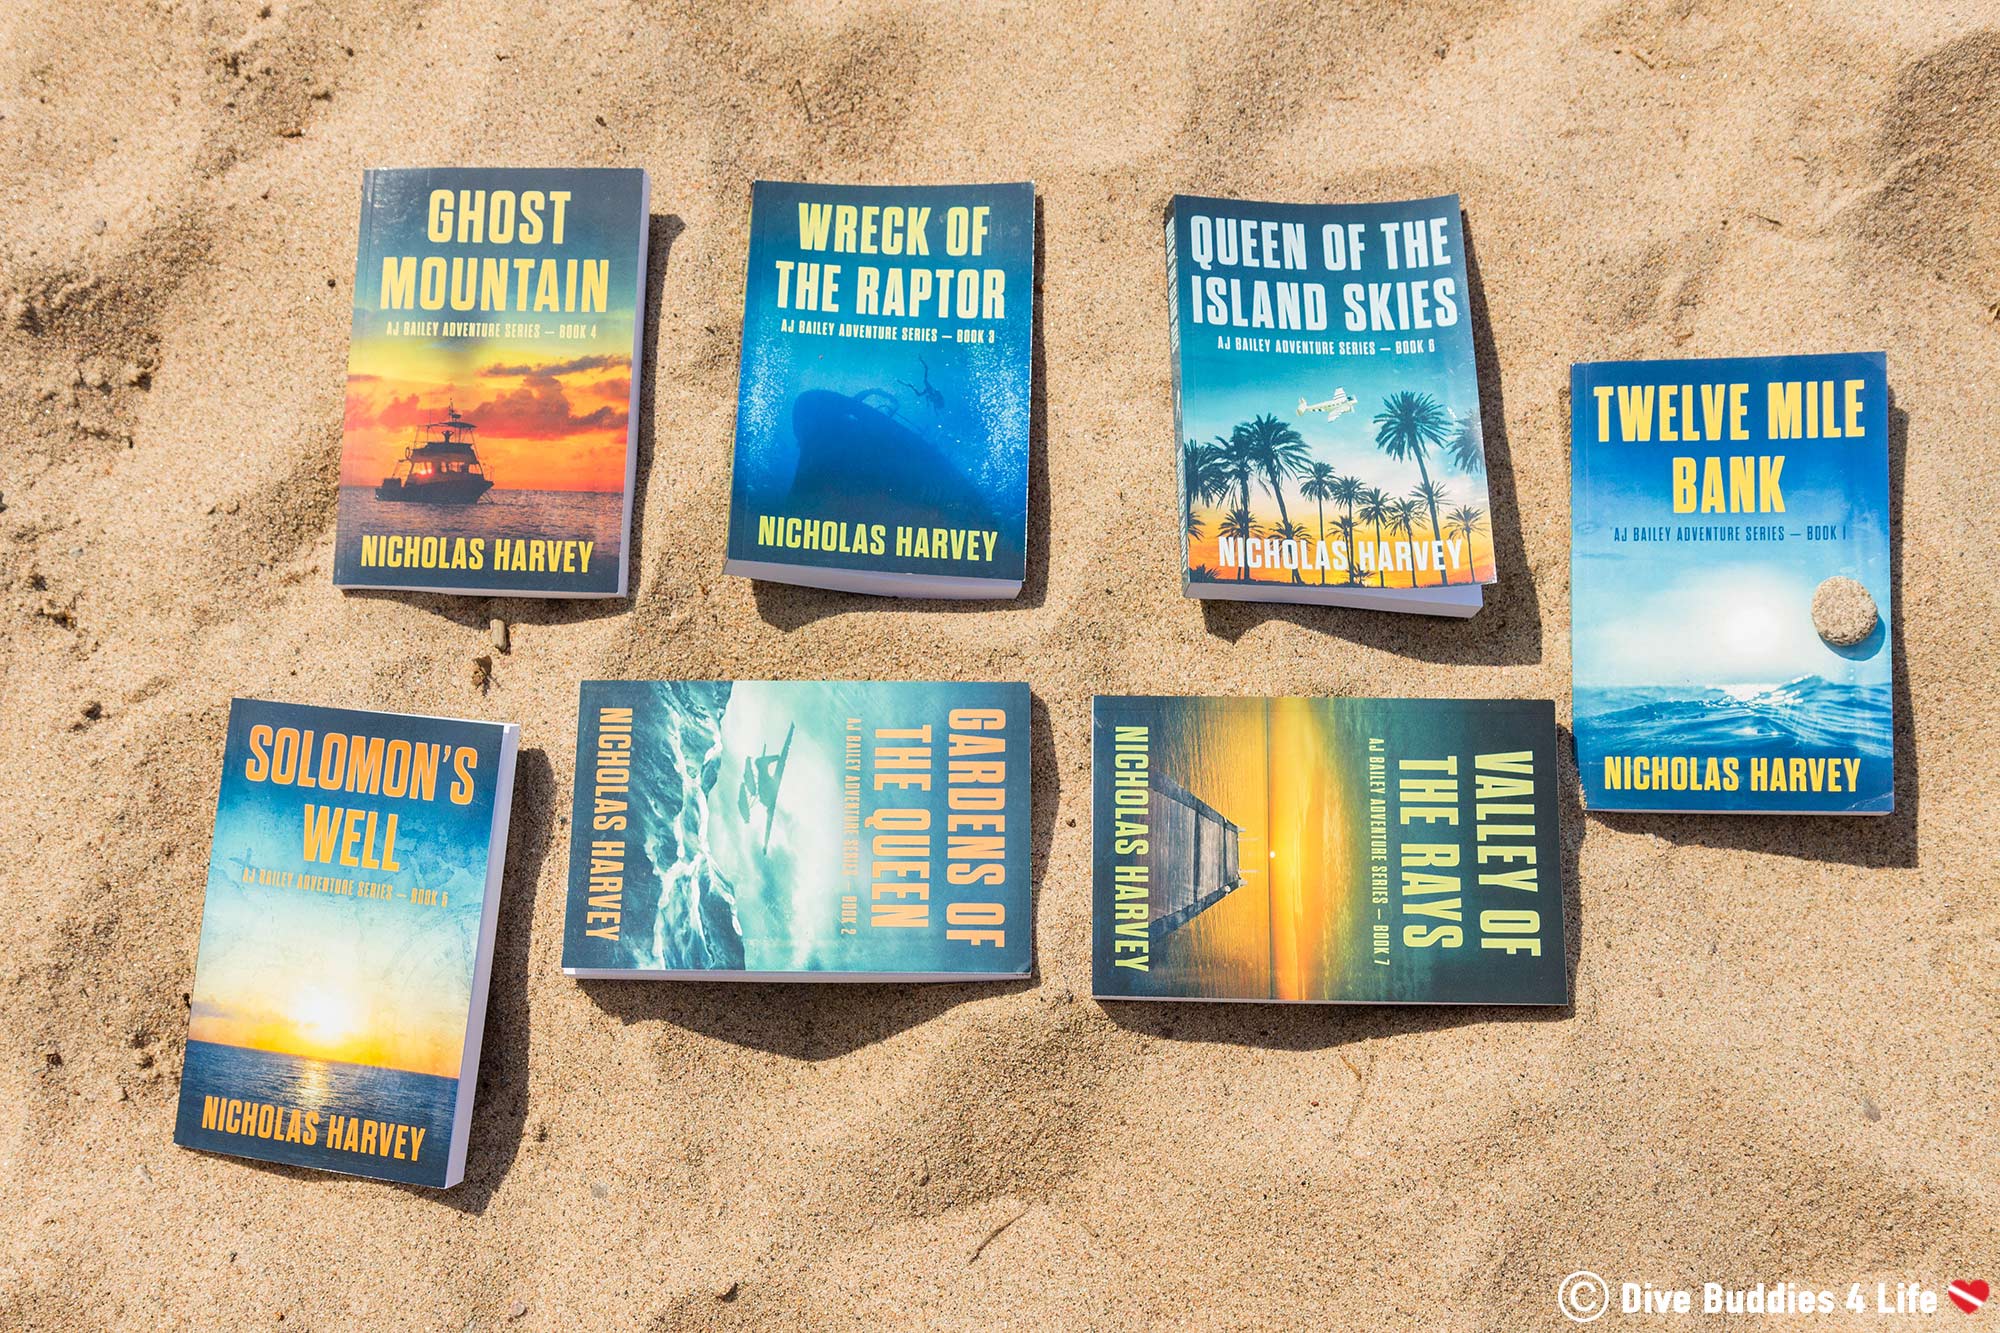 The Collection Of AJ Bailey Scuba Diving Novels Layed Out In The Sand Of A Beach